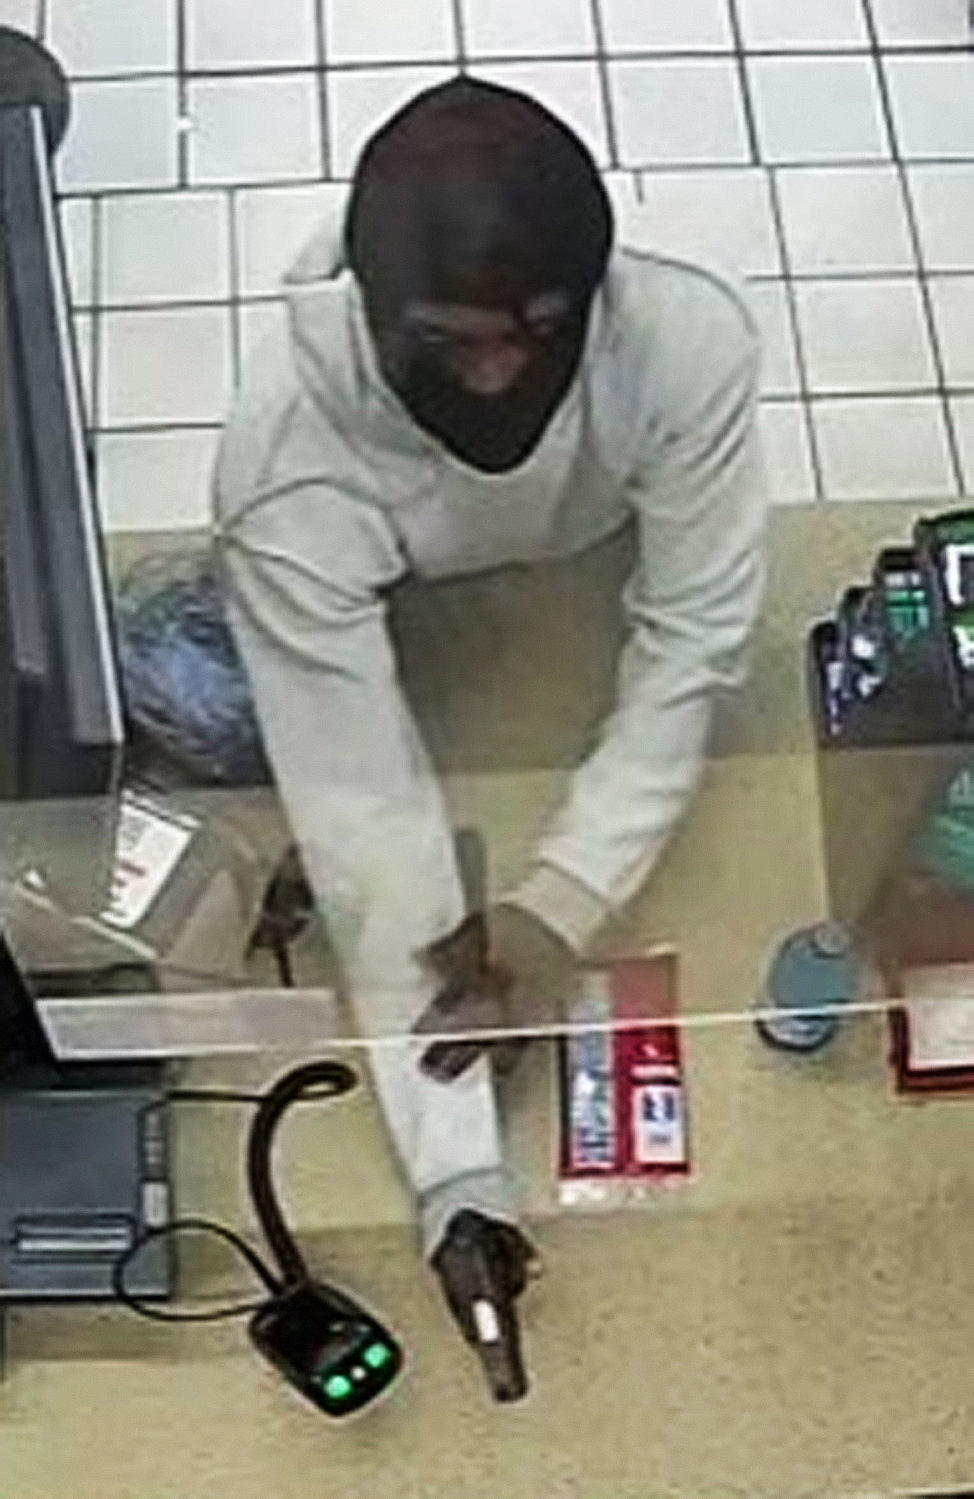 The Cumberland County Sheriff’s Office is asking the public for help in identifying a man who tried to rob a convenience store in Spring Lake earlier this month.